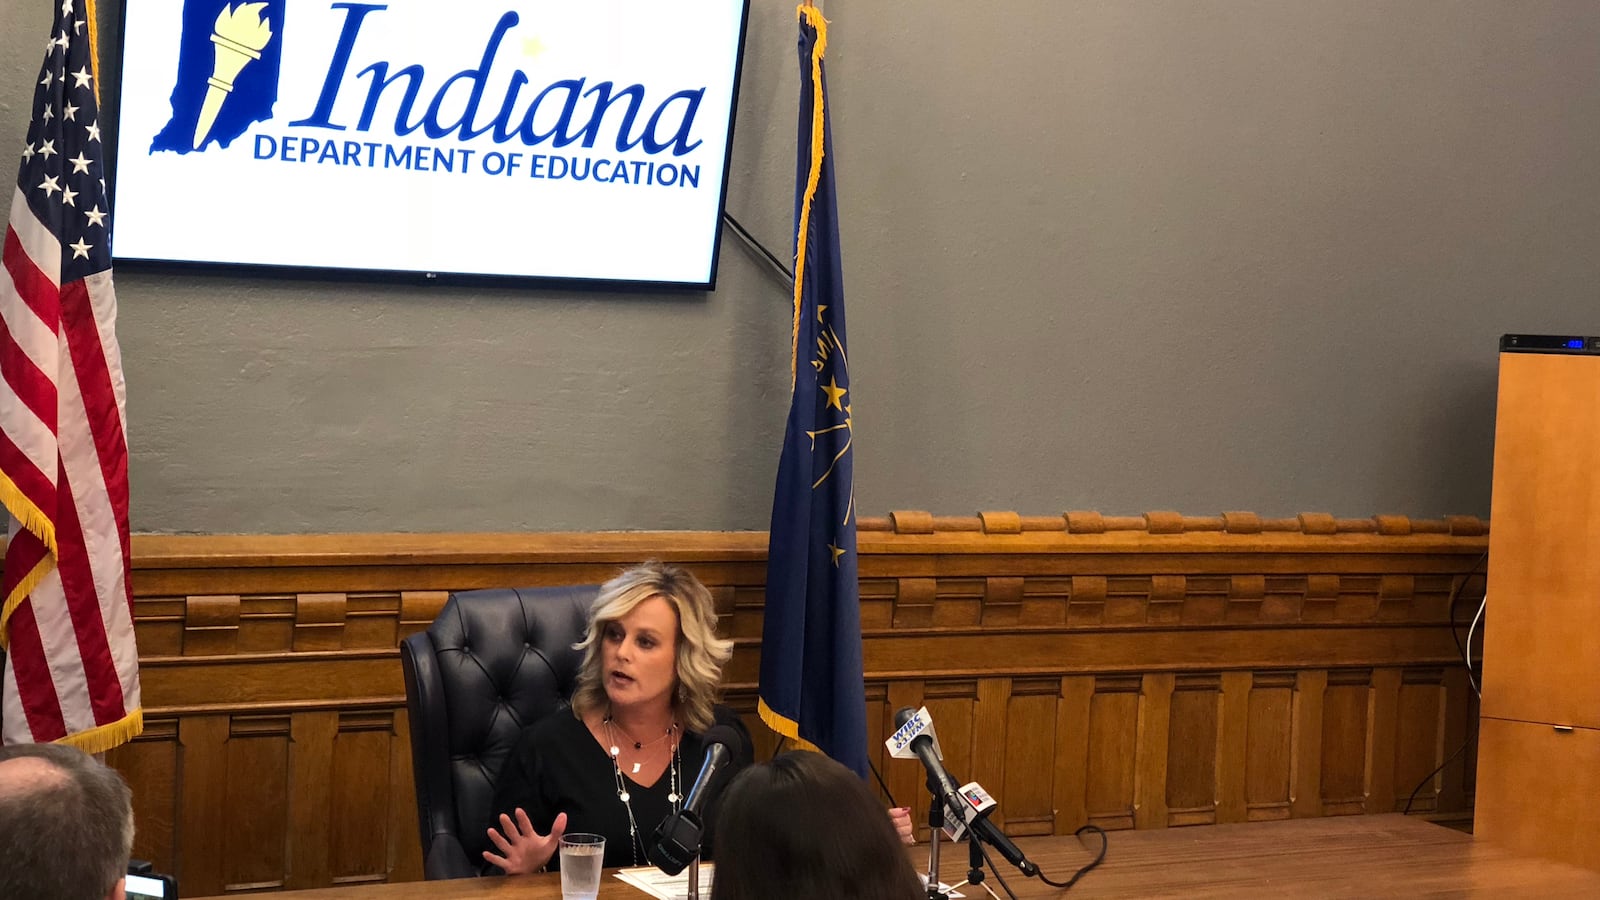 State Superintendent Jennifer McCormick announced she wouldn't seek re-election Monday at a press conference.